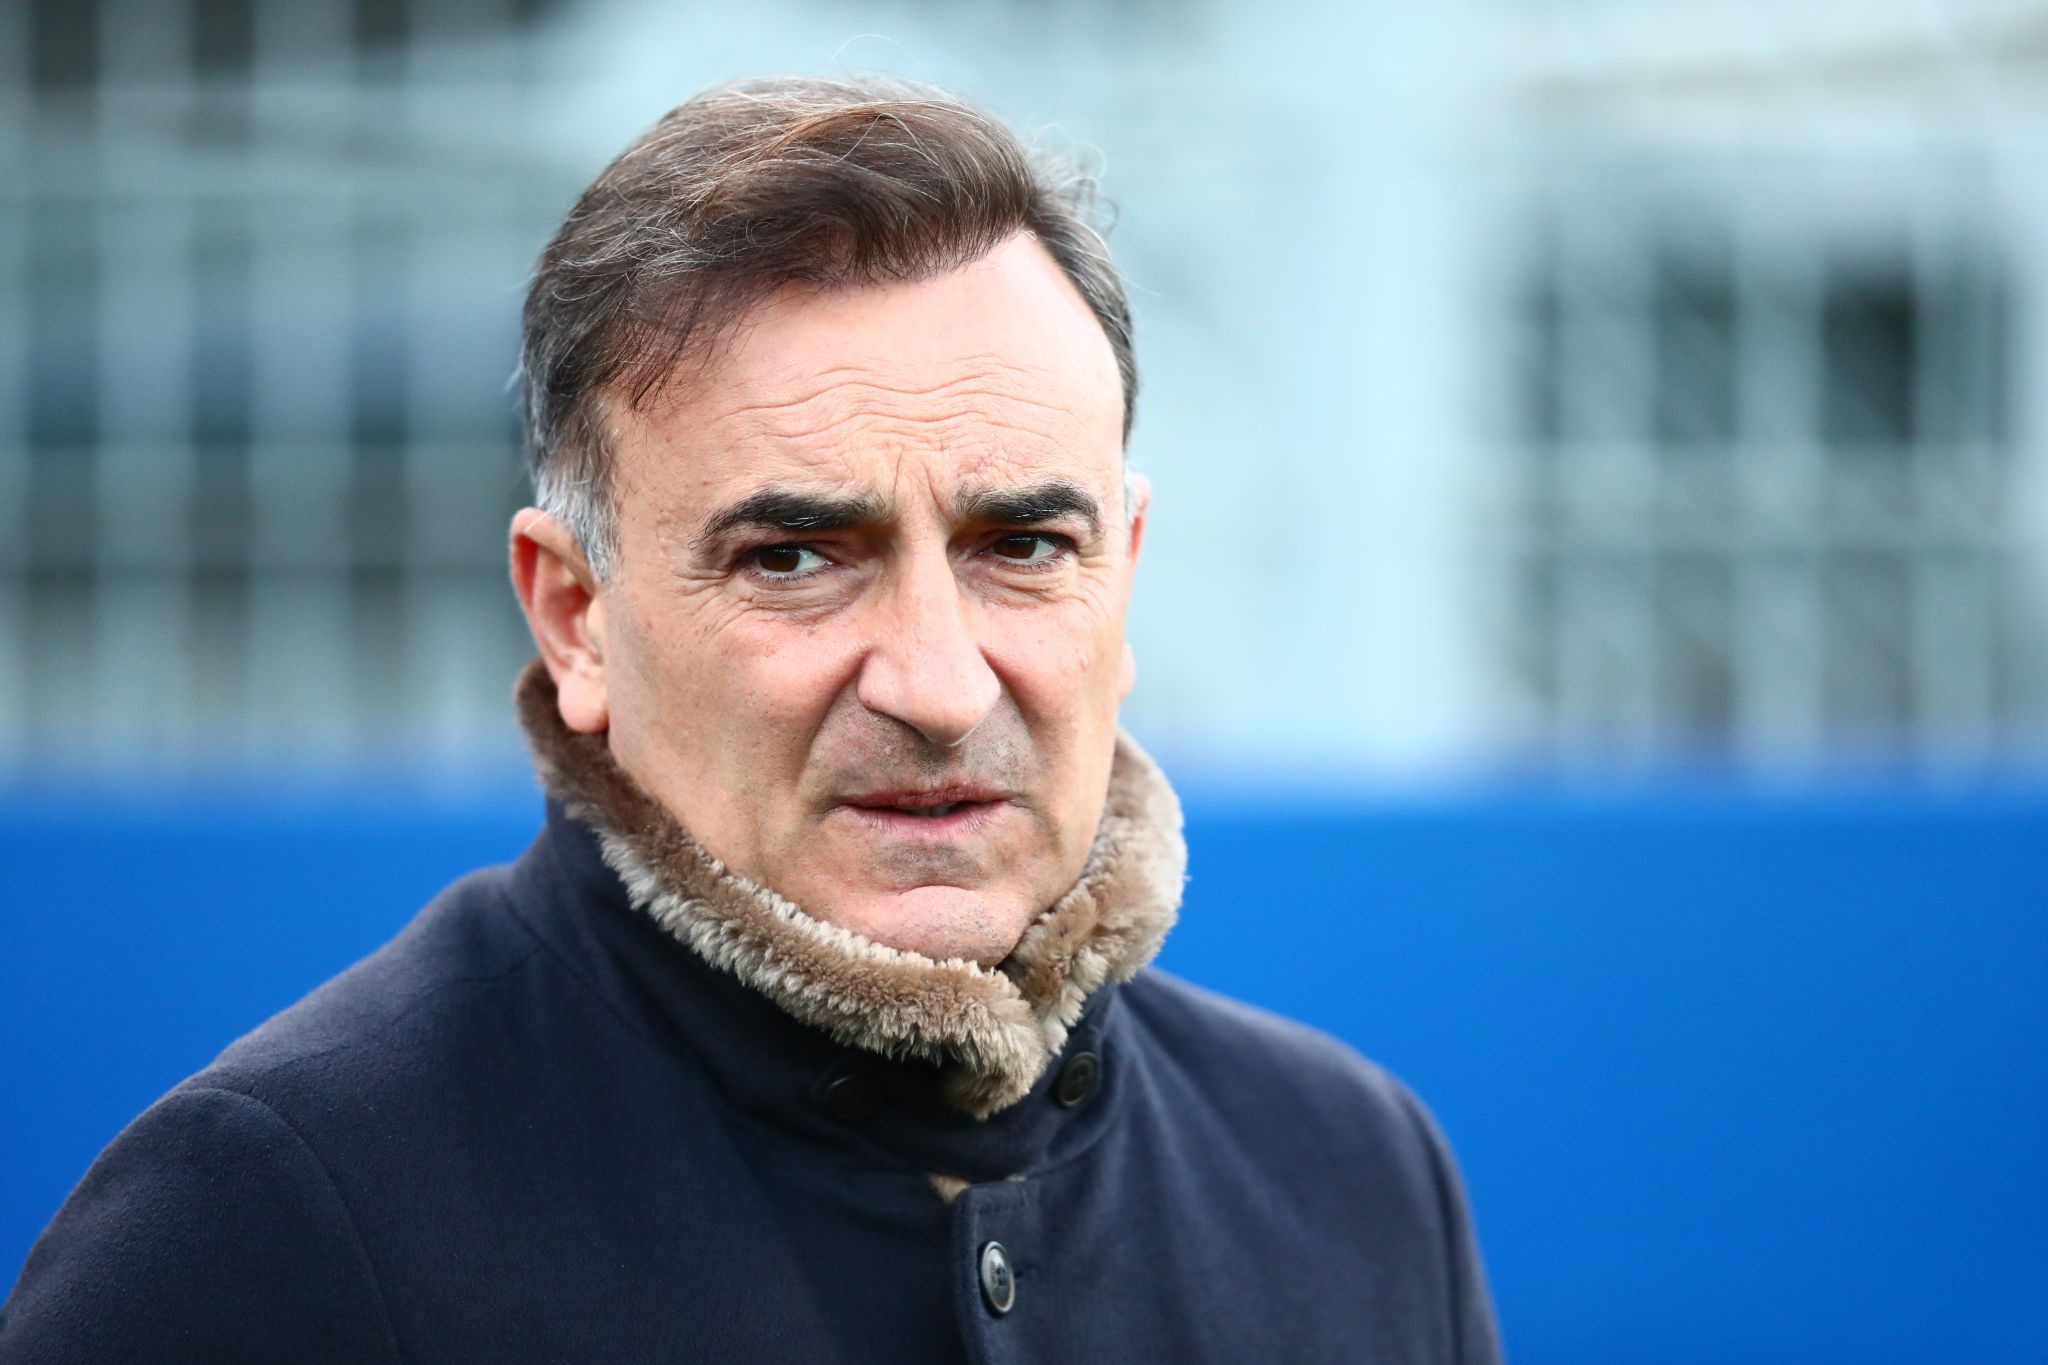 Carlos Carvalhal: “I have never seen things like these before”